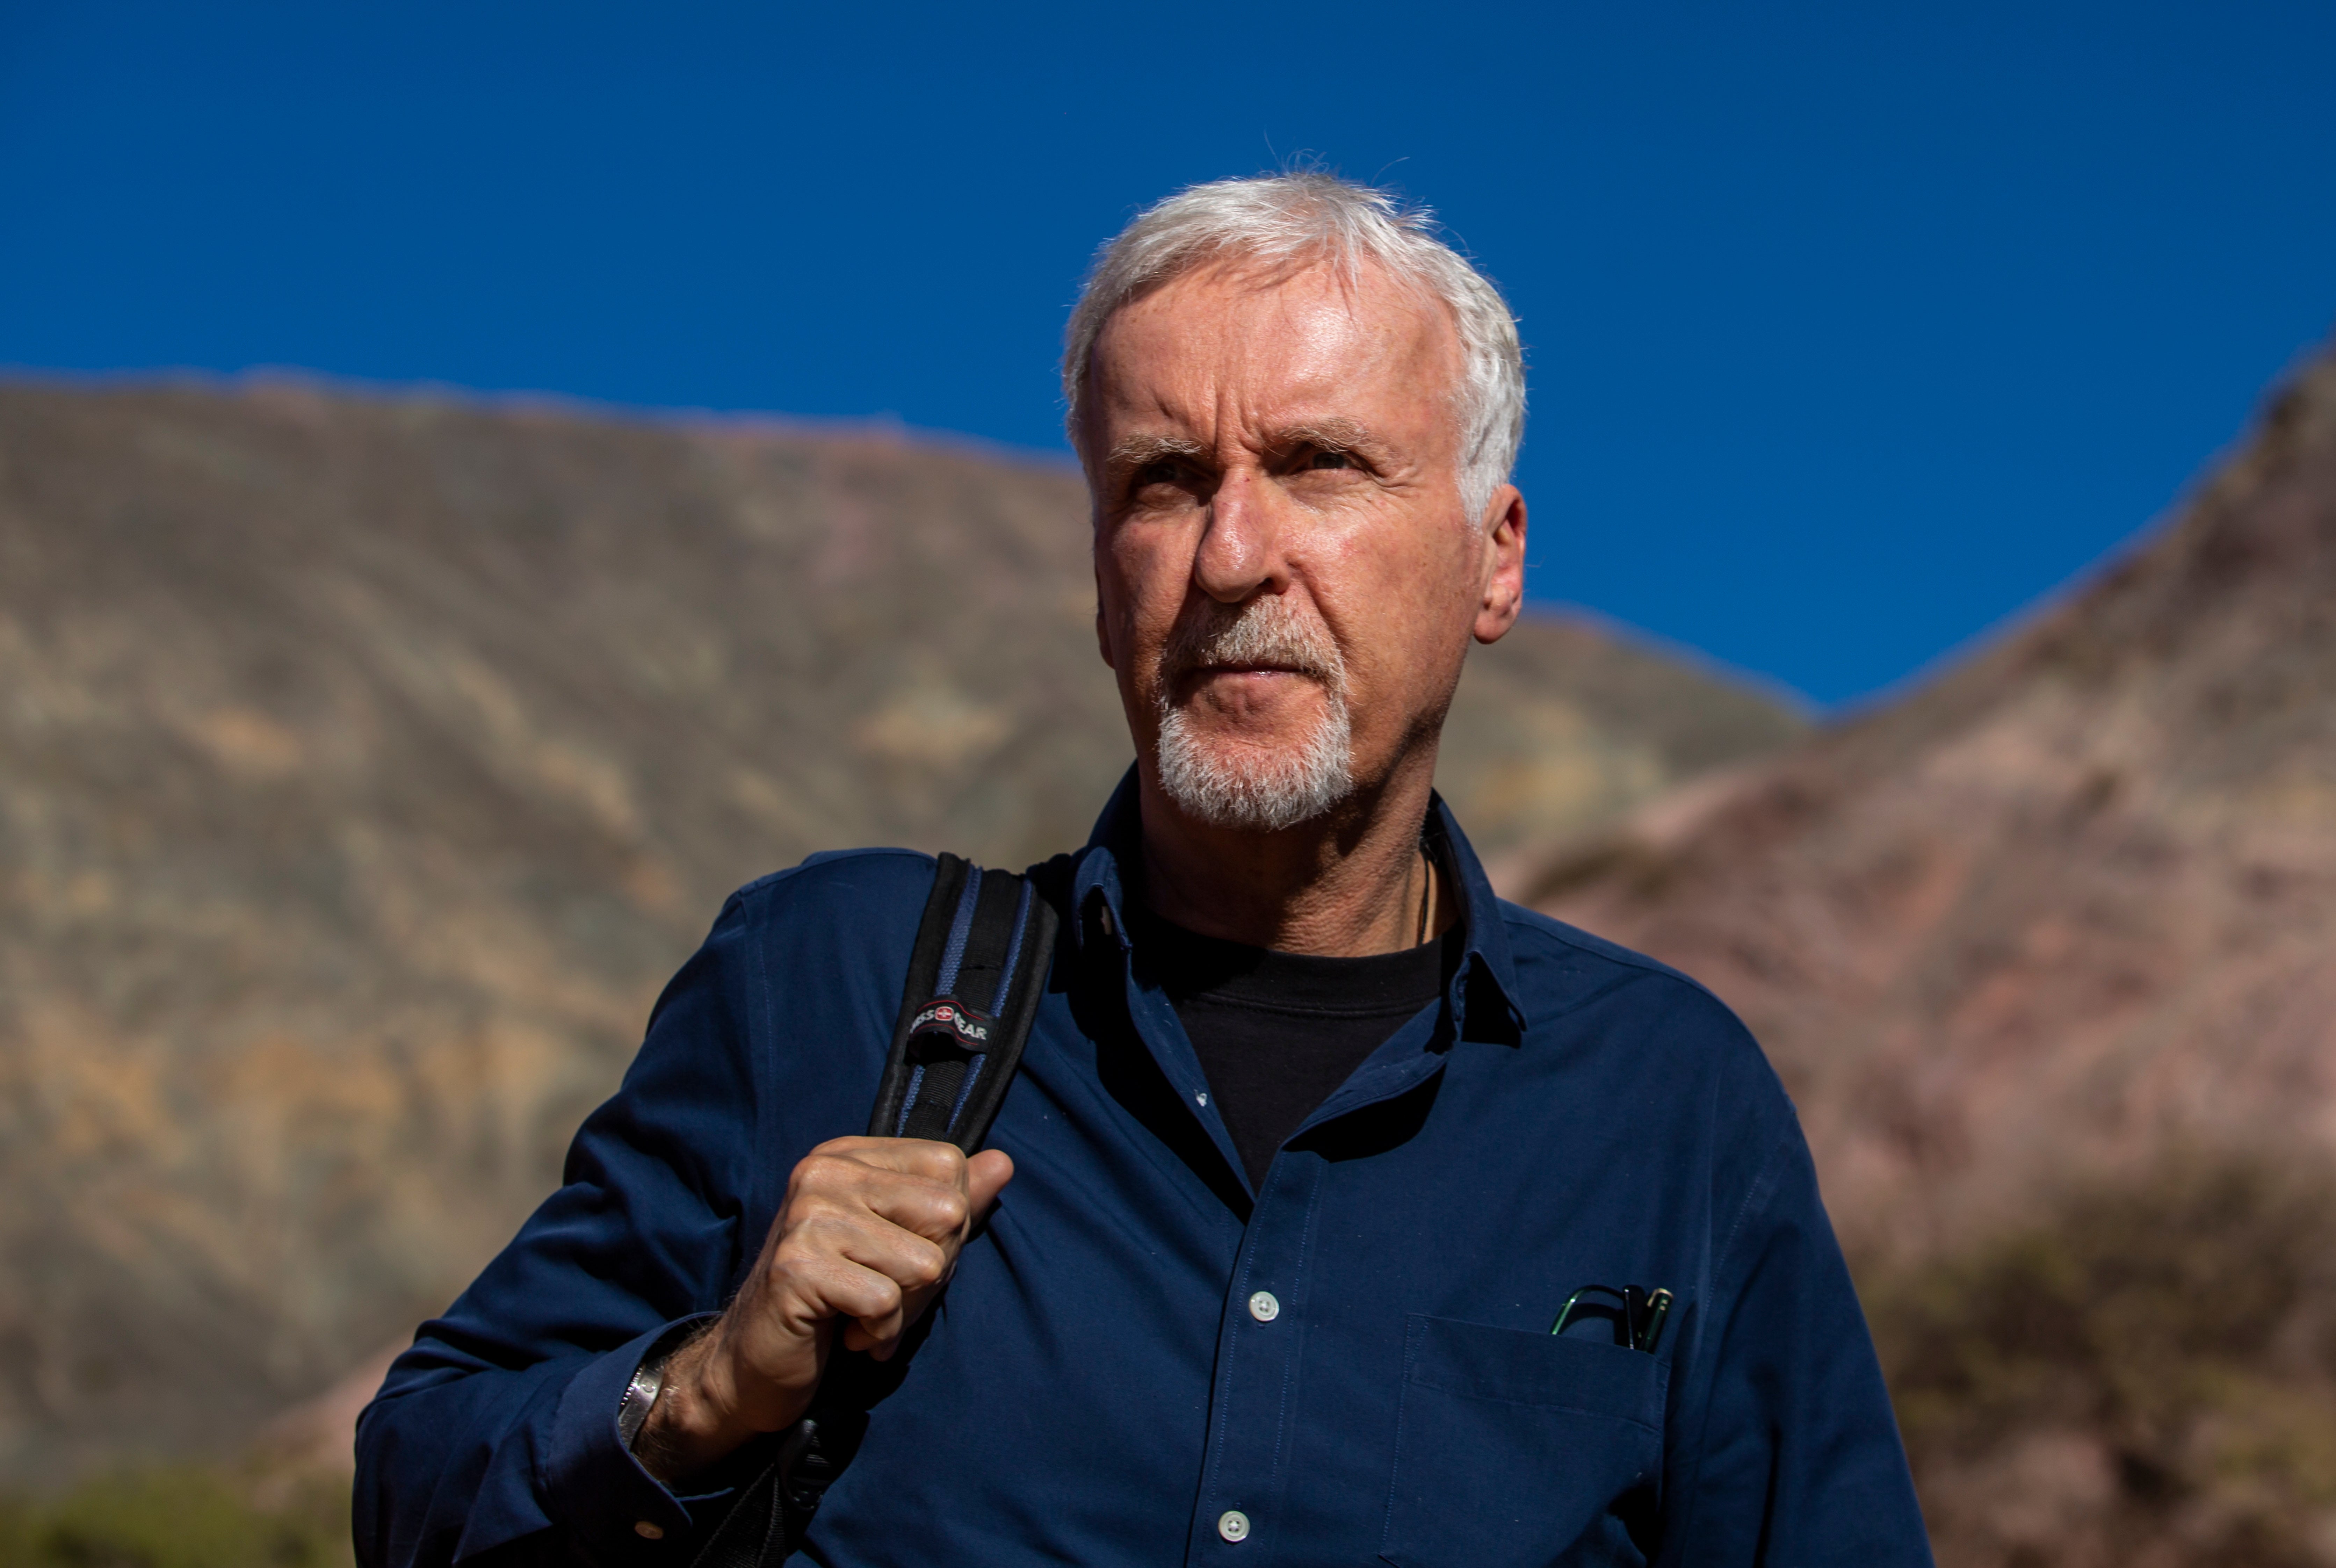 James Cameron has visited the Titanic wreck multiple times and offered to be a witness in the Titan submersible disaster investigation. but he claims he has never been called upon.